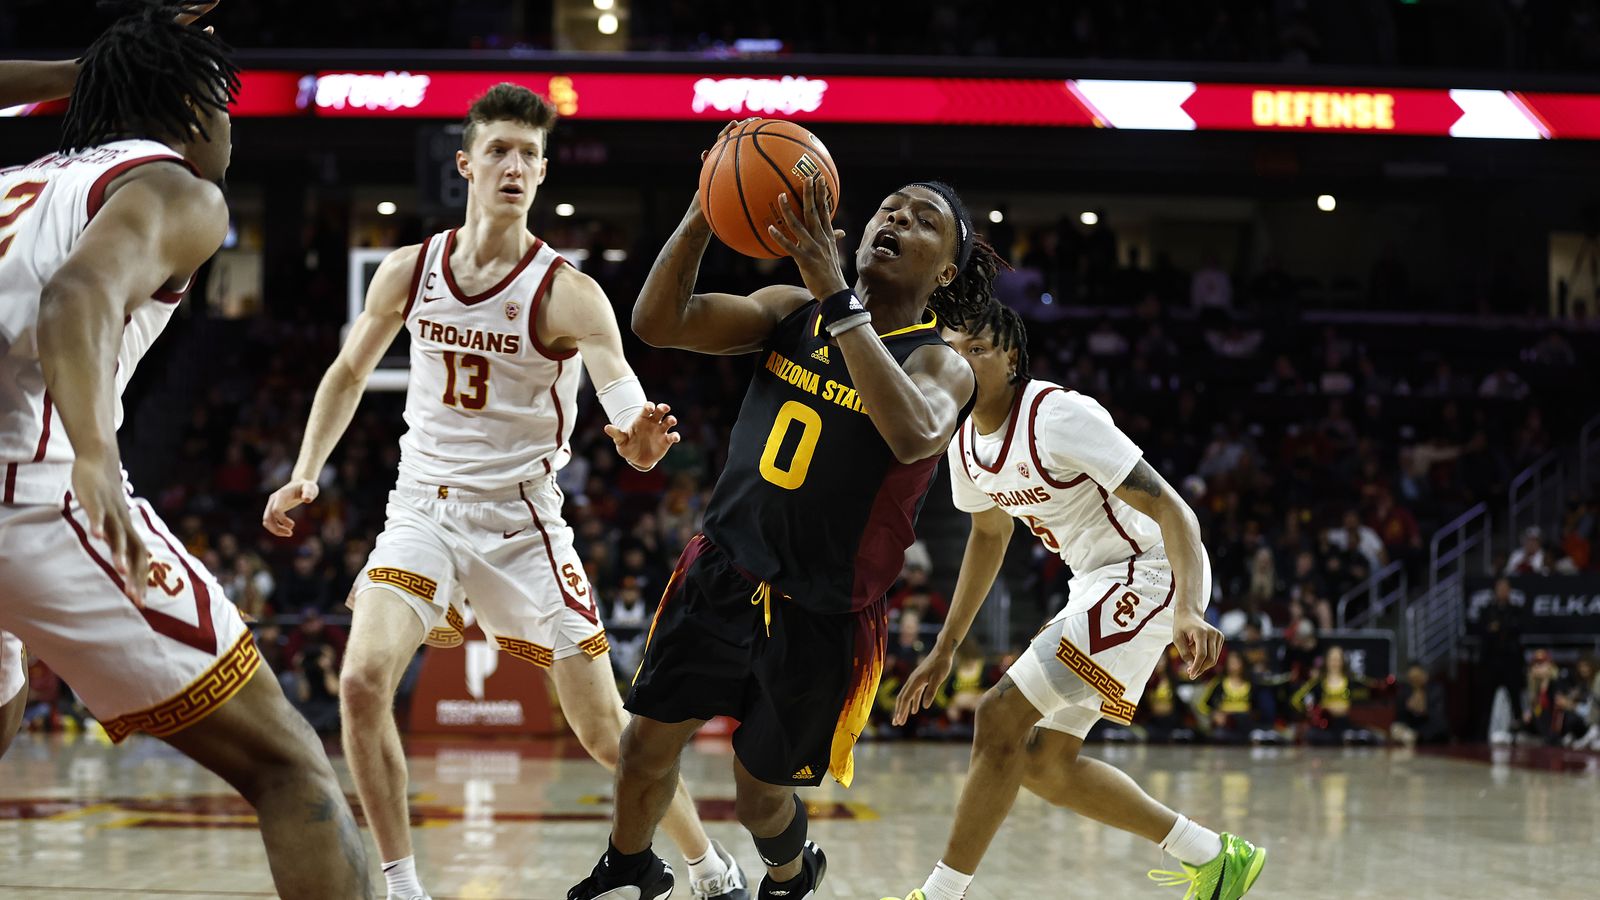 ASU Sun Devils fighting for spot in March Madness brackets as Pac12